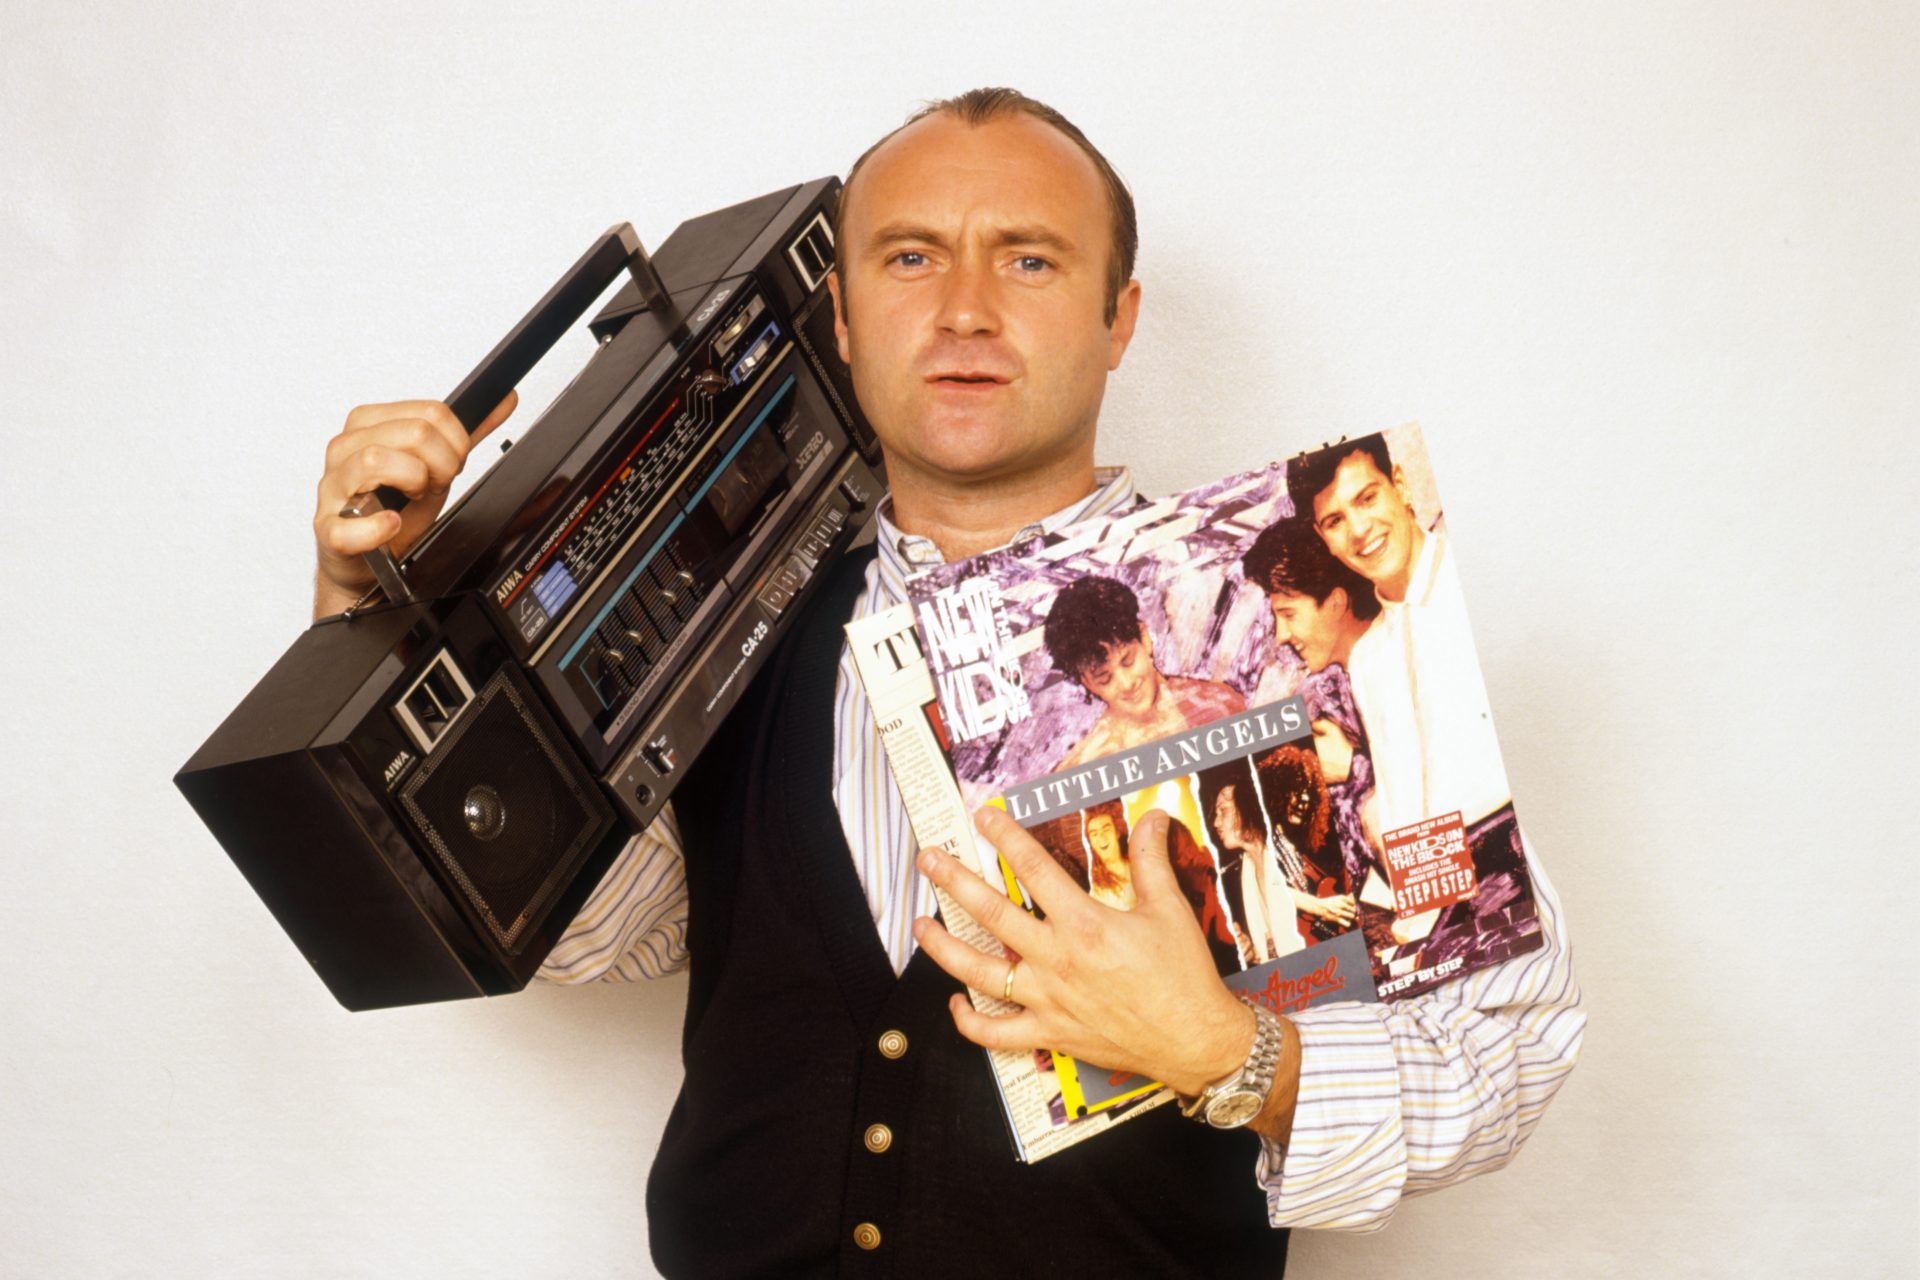 <p>Once described as the hardest working man in showbiz, Phil Collins is now taking a well-earned break. Despite the many ups and downs in his career, his legacy is secure.</p>